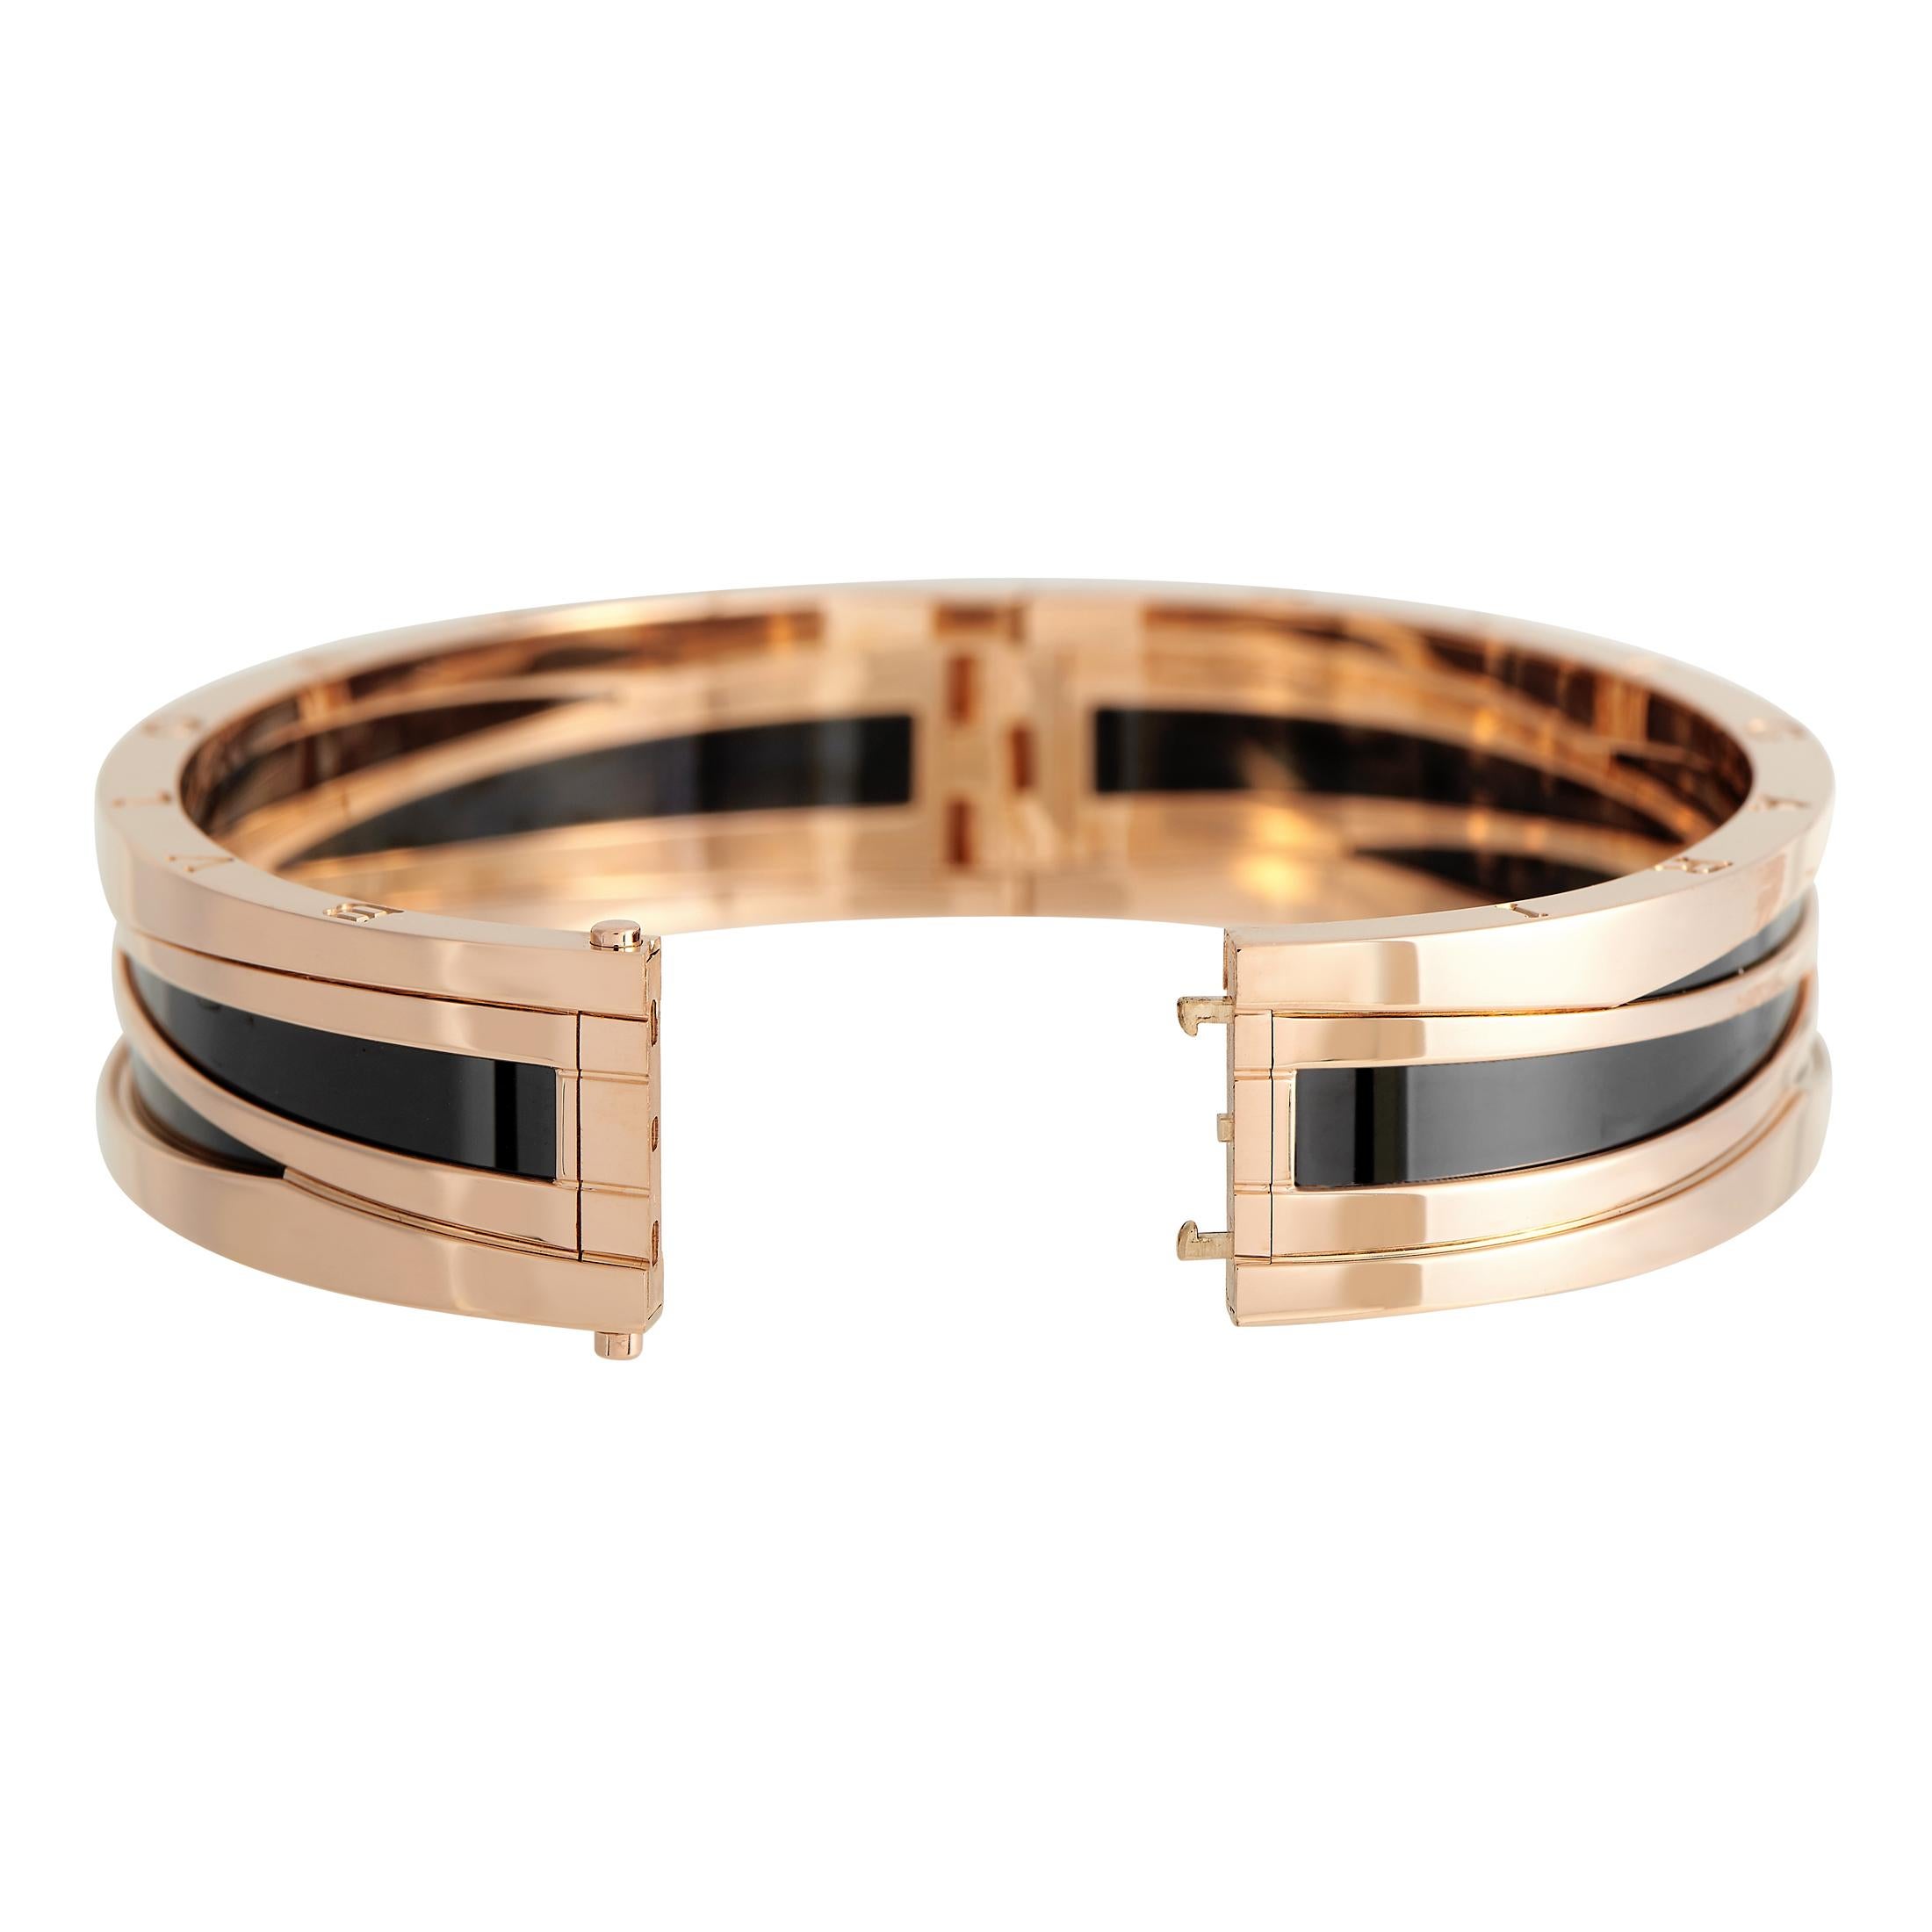 Bvlgari B.zero1 18K Rose Gold Ceramic Bracelet Size Large In Excellent Condition For Sale In Southampton, PA